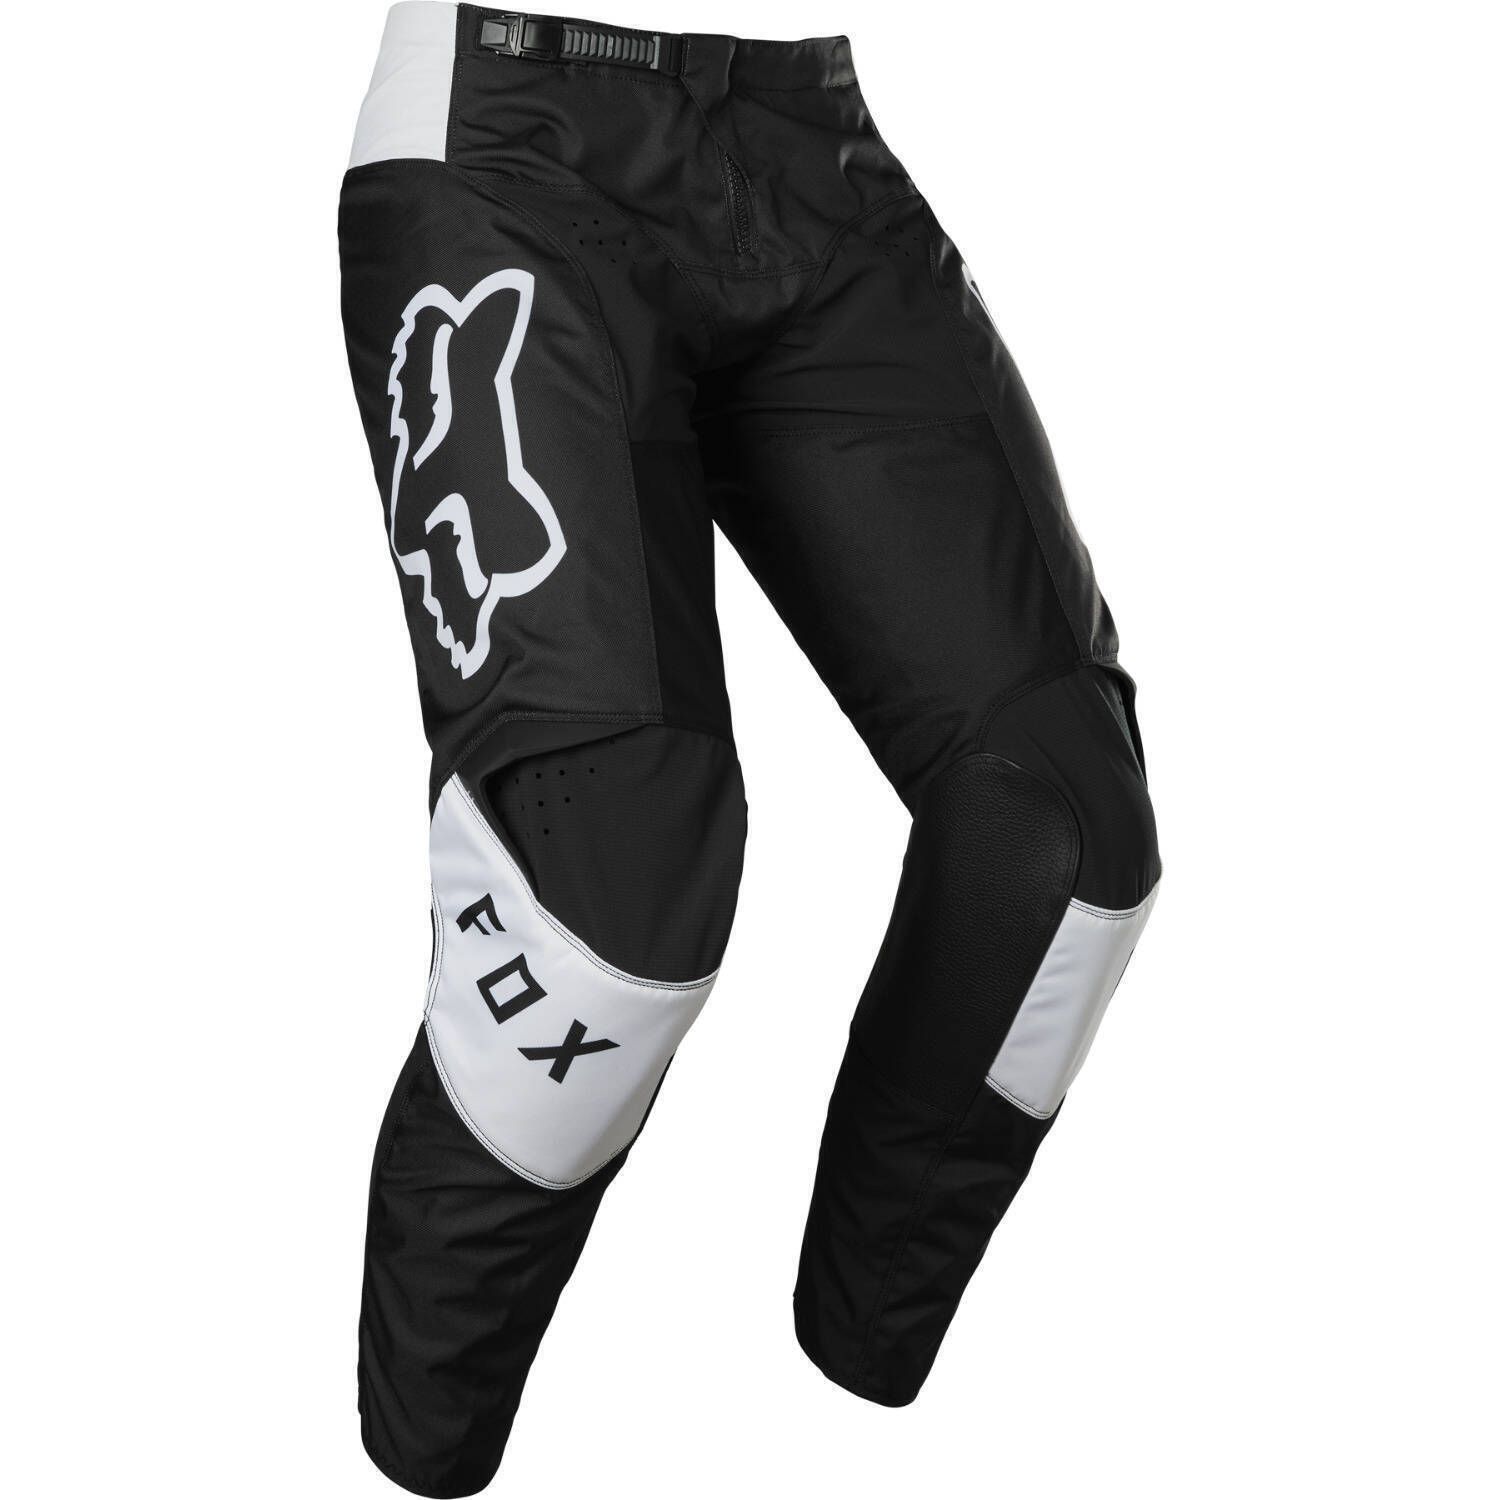 26 Fox Racing 180 Cota Youth Off-Road Motorcycle Pants Blue 